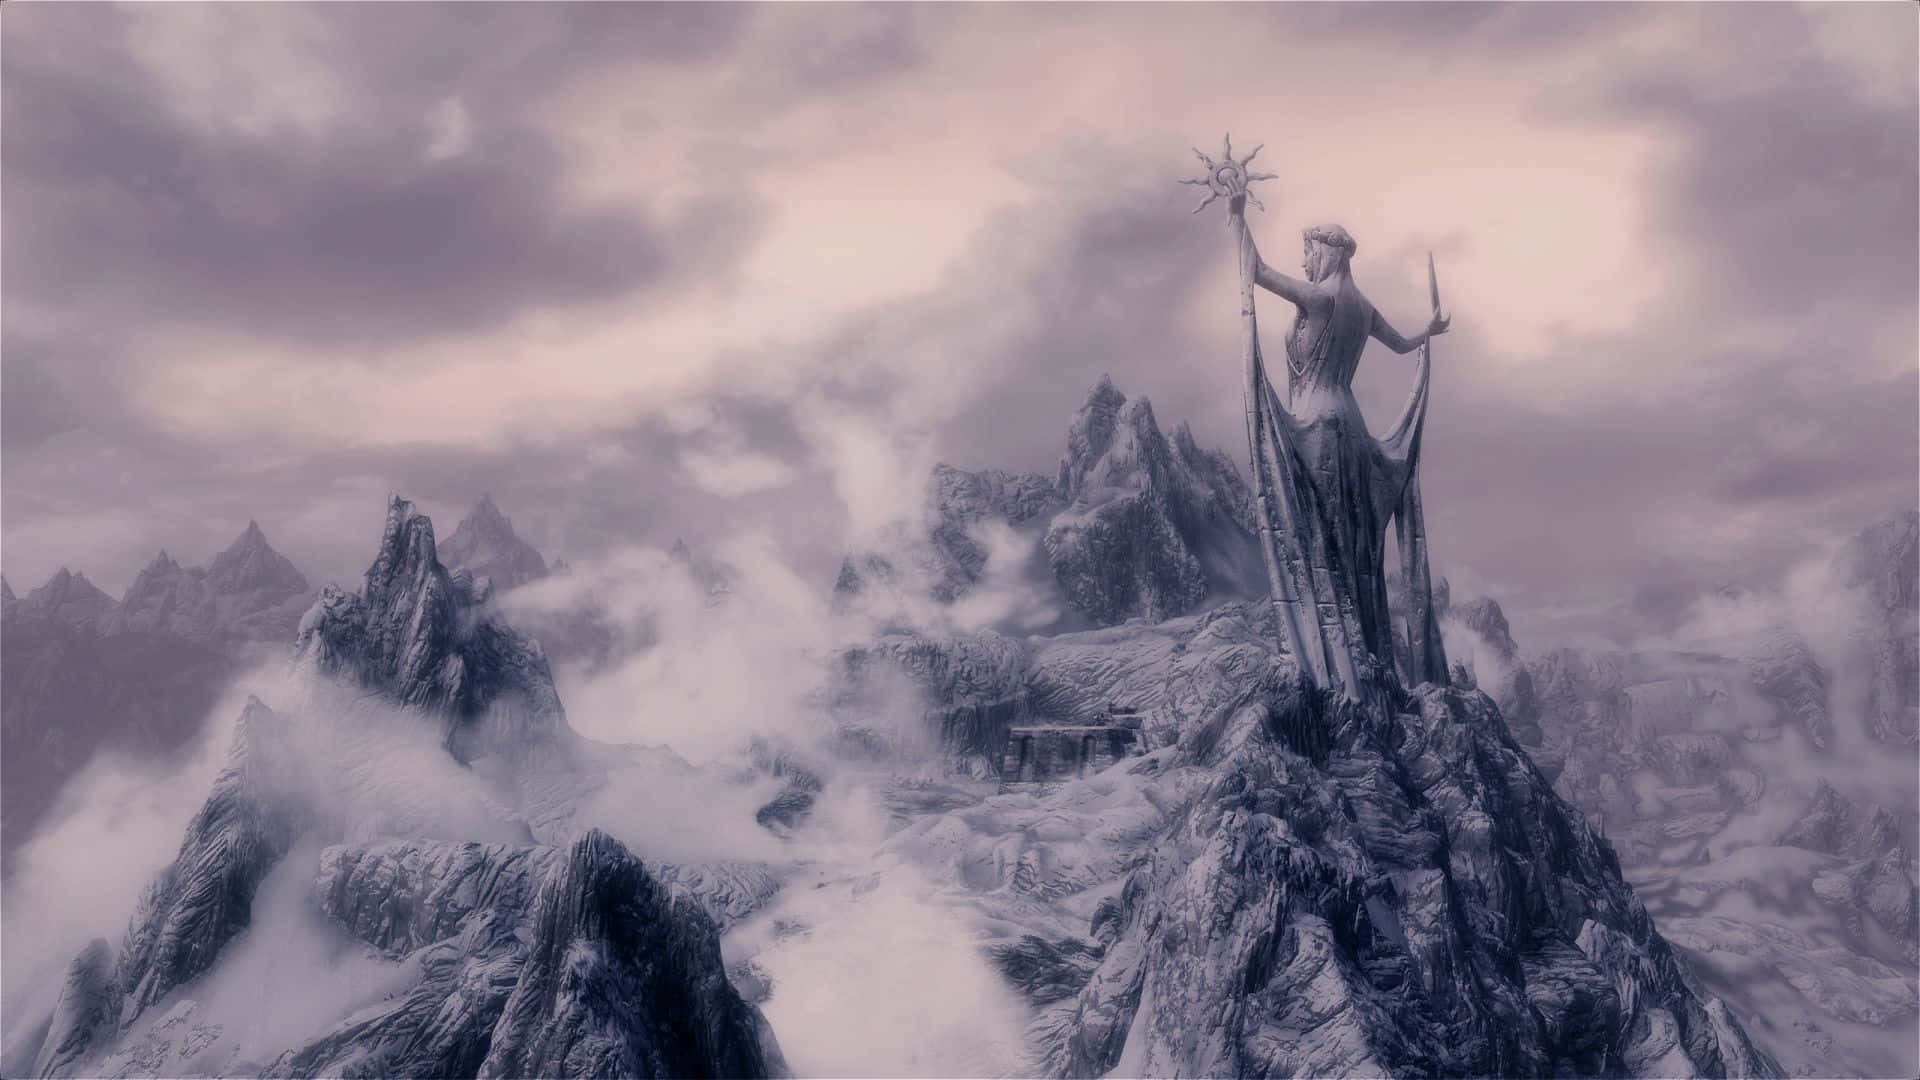 Epic Skyrim Landscape in the Heart of Nature